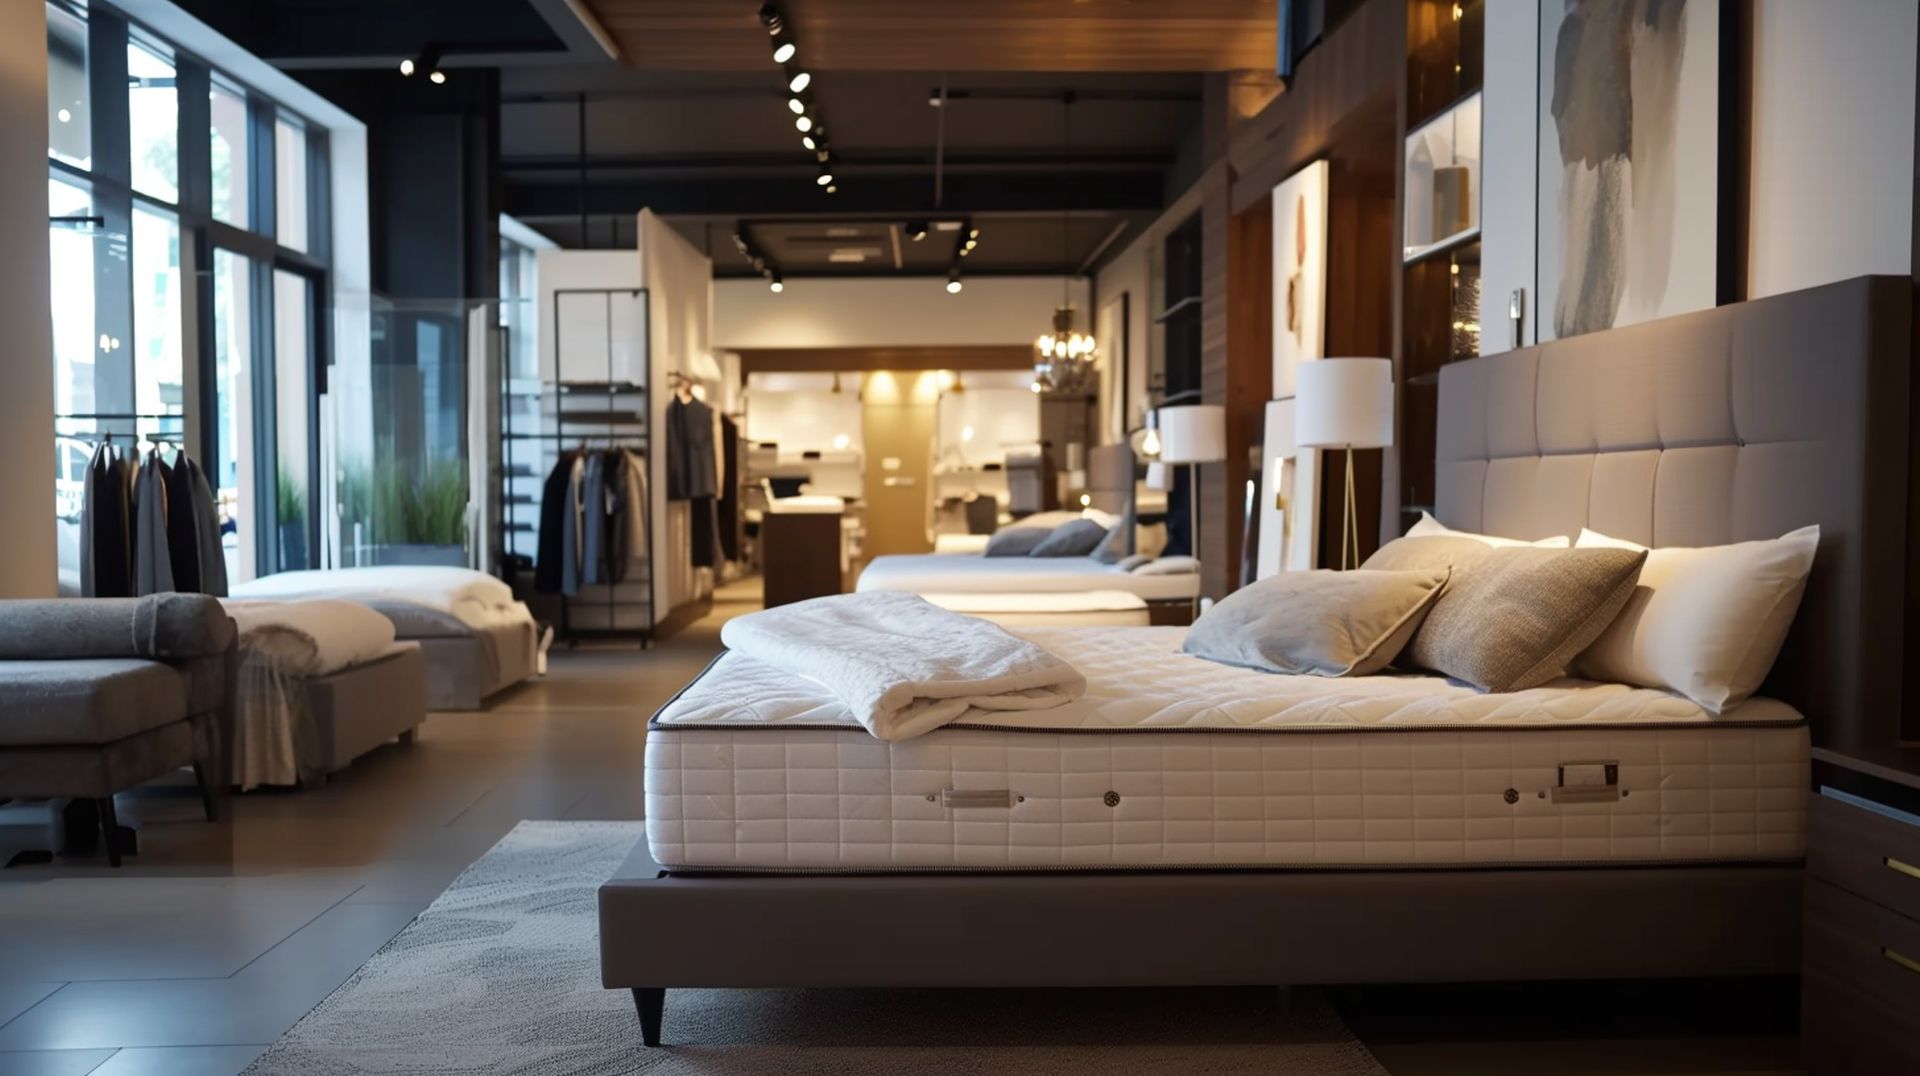 If you're looking for a new bed, mattress stores in Westland offer the best customer and delivery service, financing, and warranties in Michigan